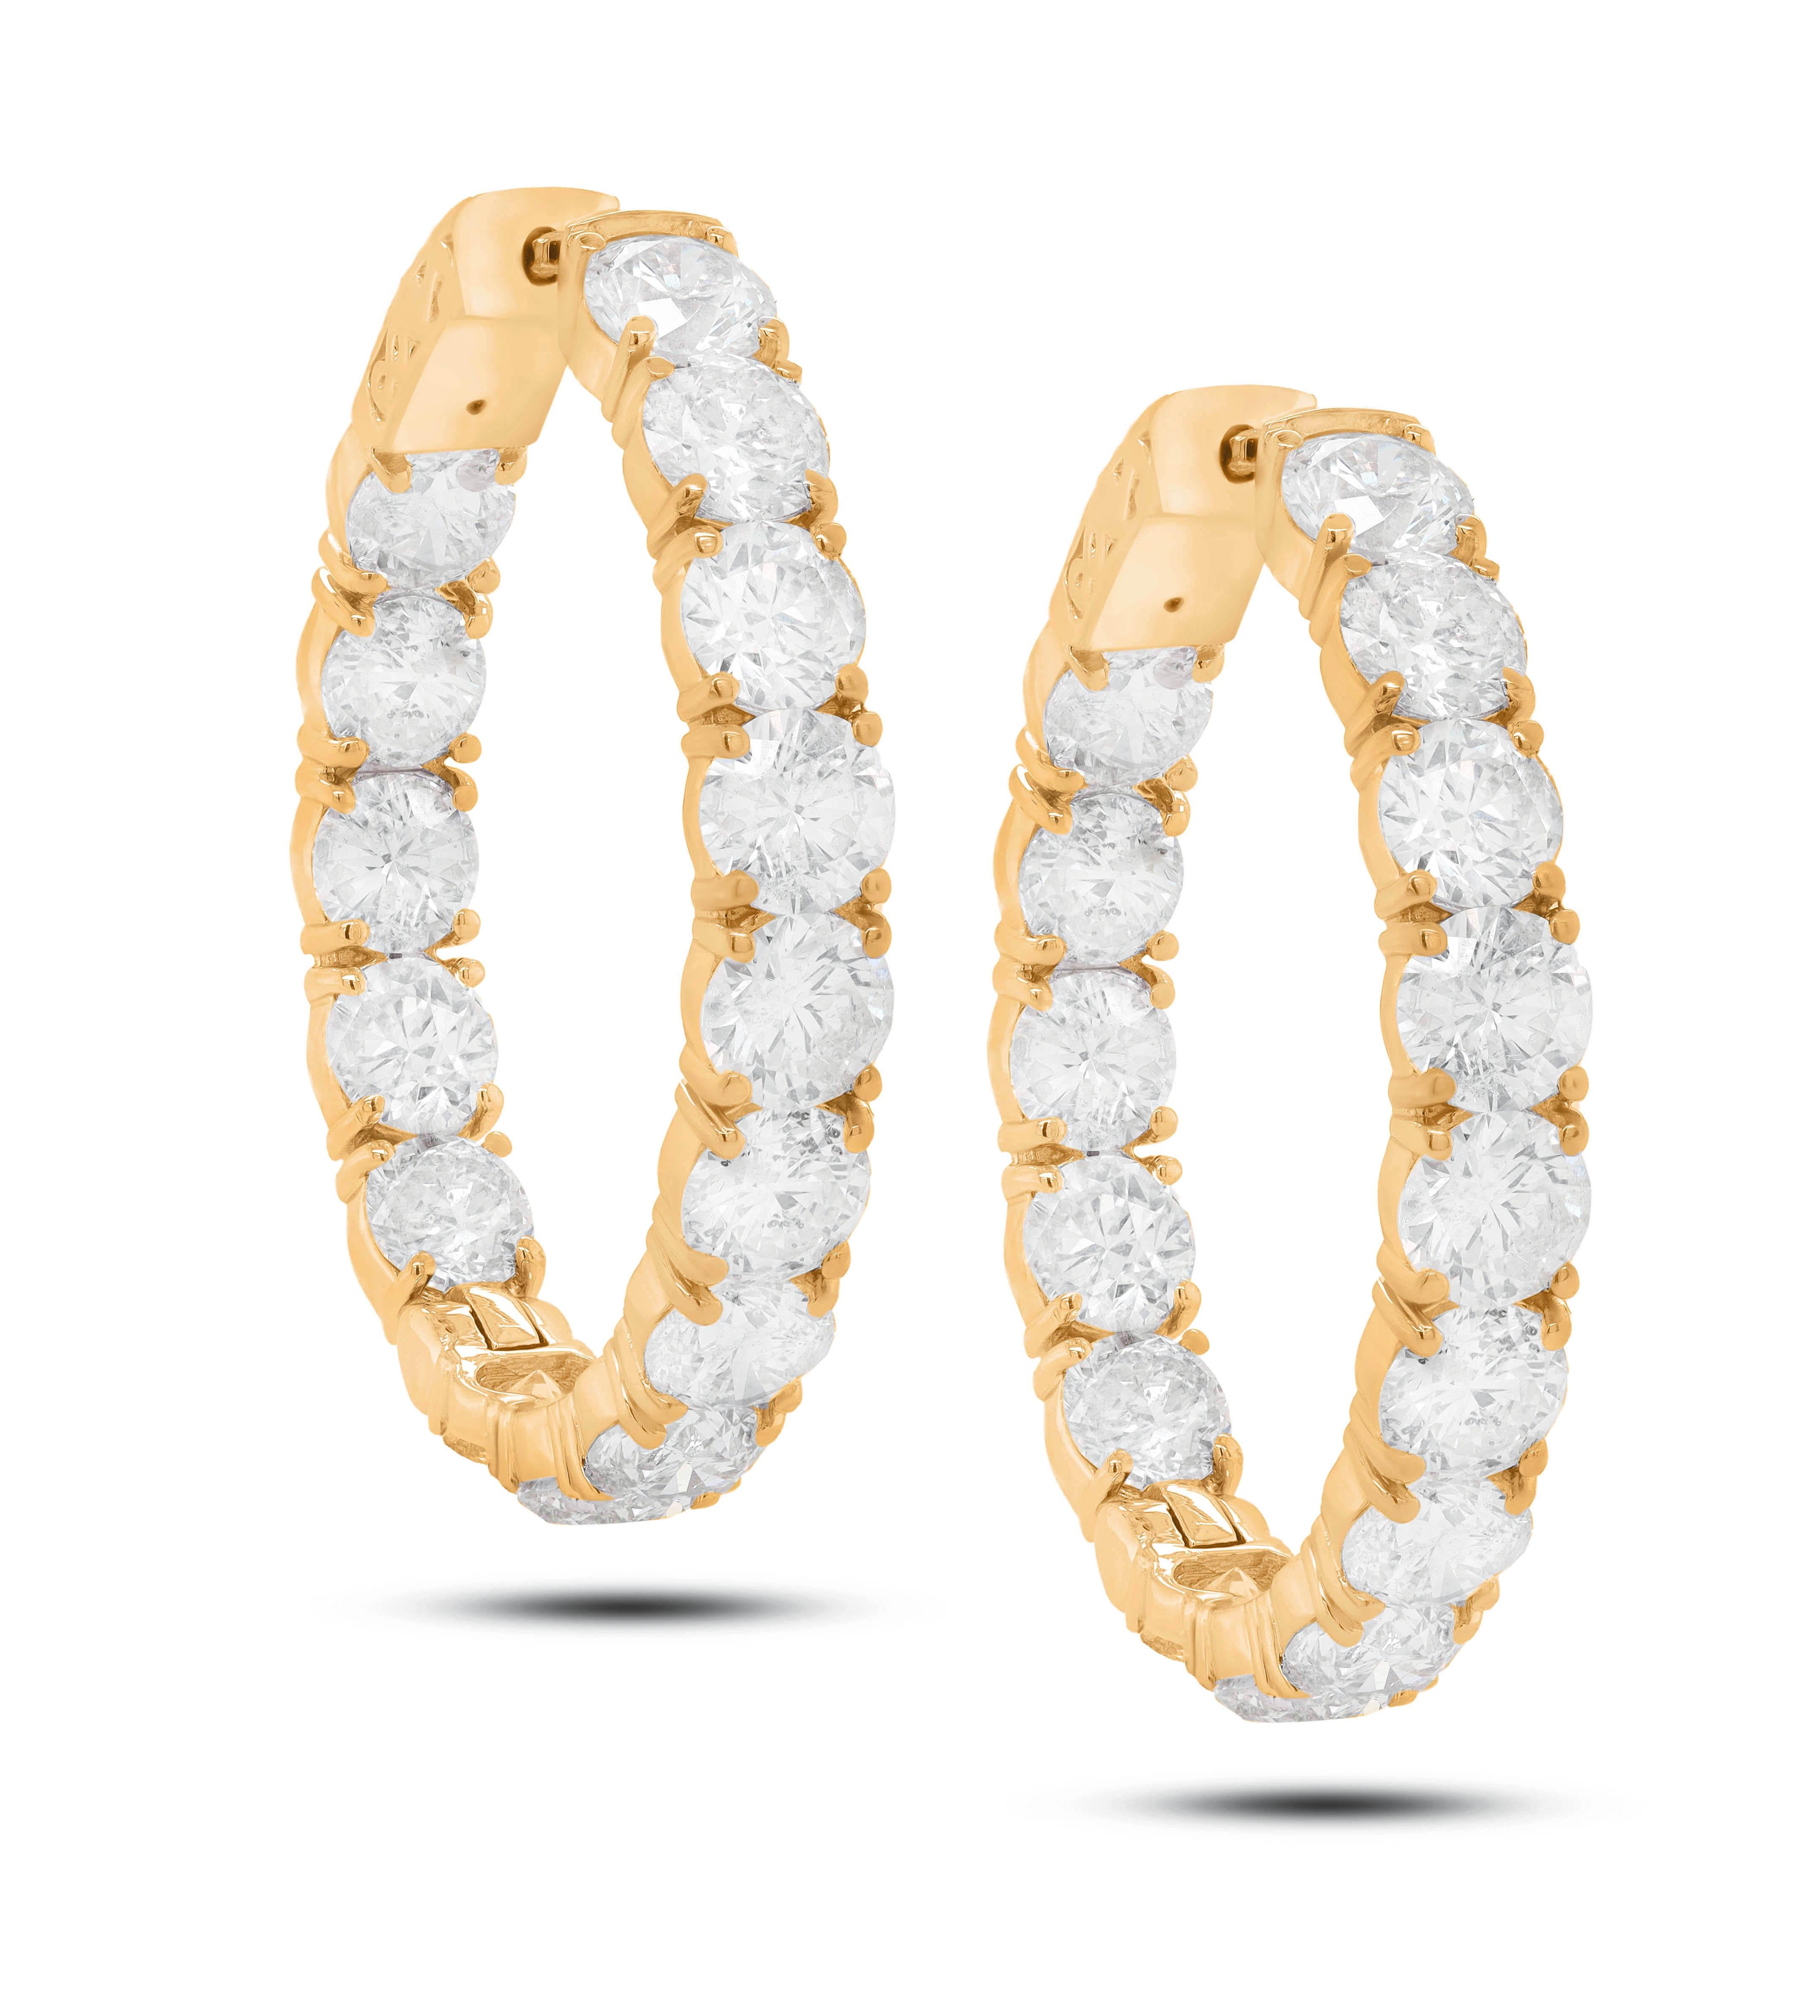 18K Yellow Gold Diamond Earrings featuring 9.35 Carat T.W. of Natural  and White Diamonds

Underline your look with this sharp 18K White and DIAMOND Earrings. High quality Diamonds. This Earrings will underline your exquisite look for any